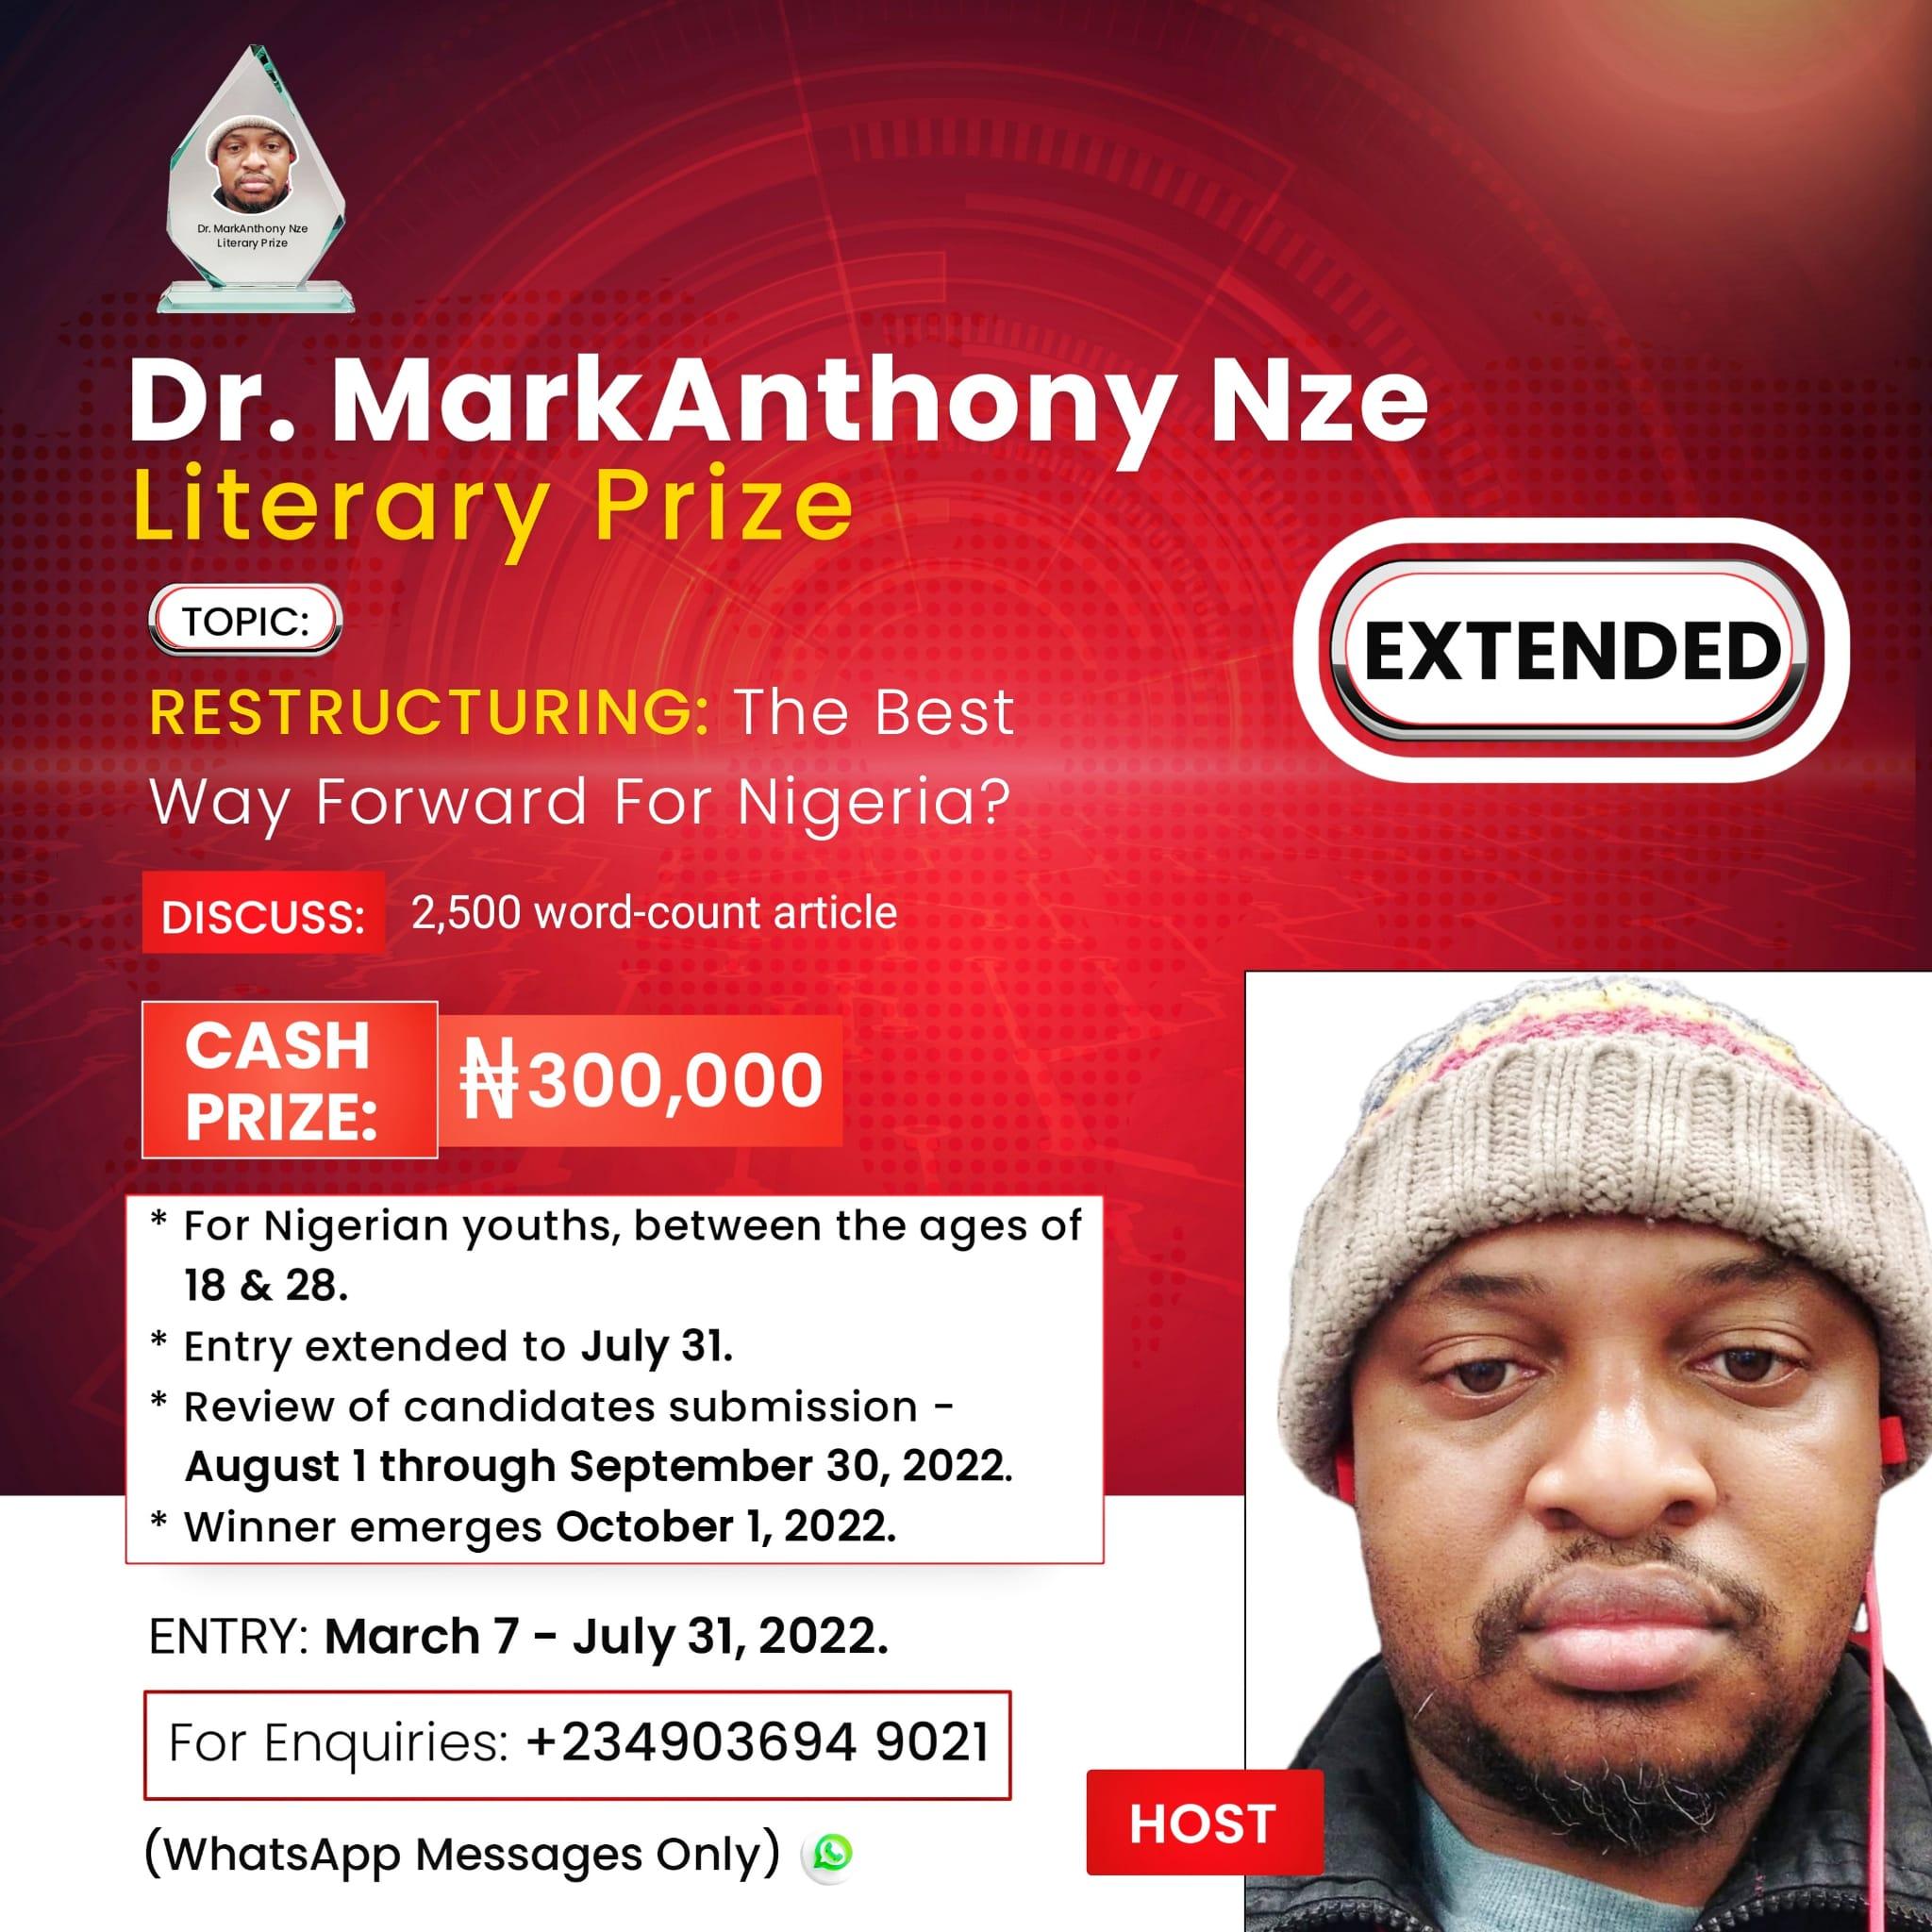 Prof. MarkAnthony Nze Literary Prize A Shot at Your Dreams